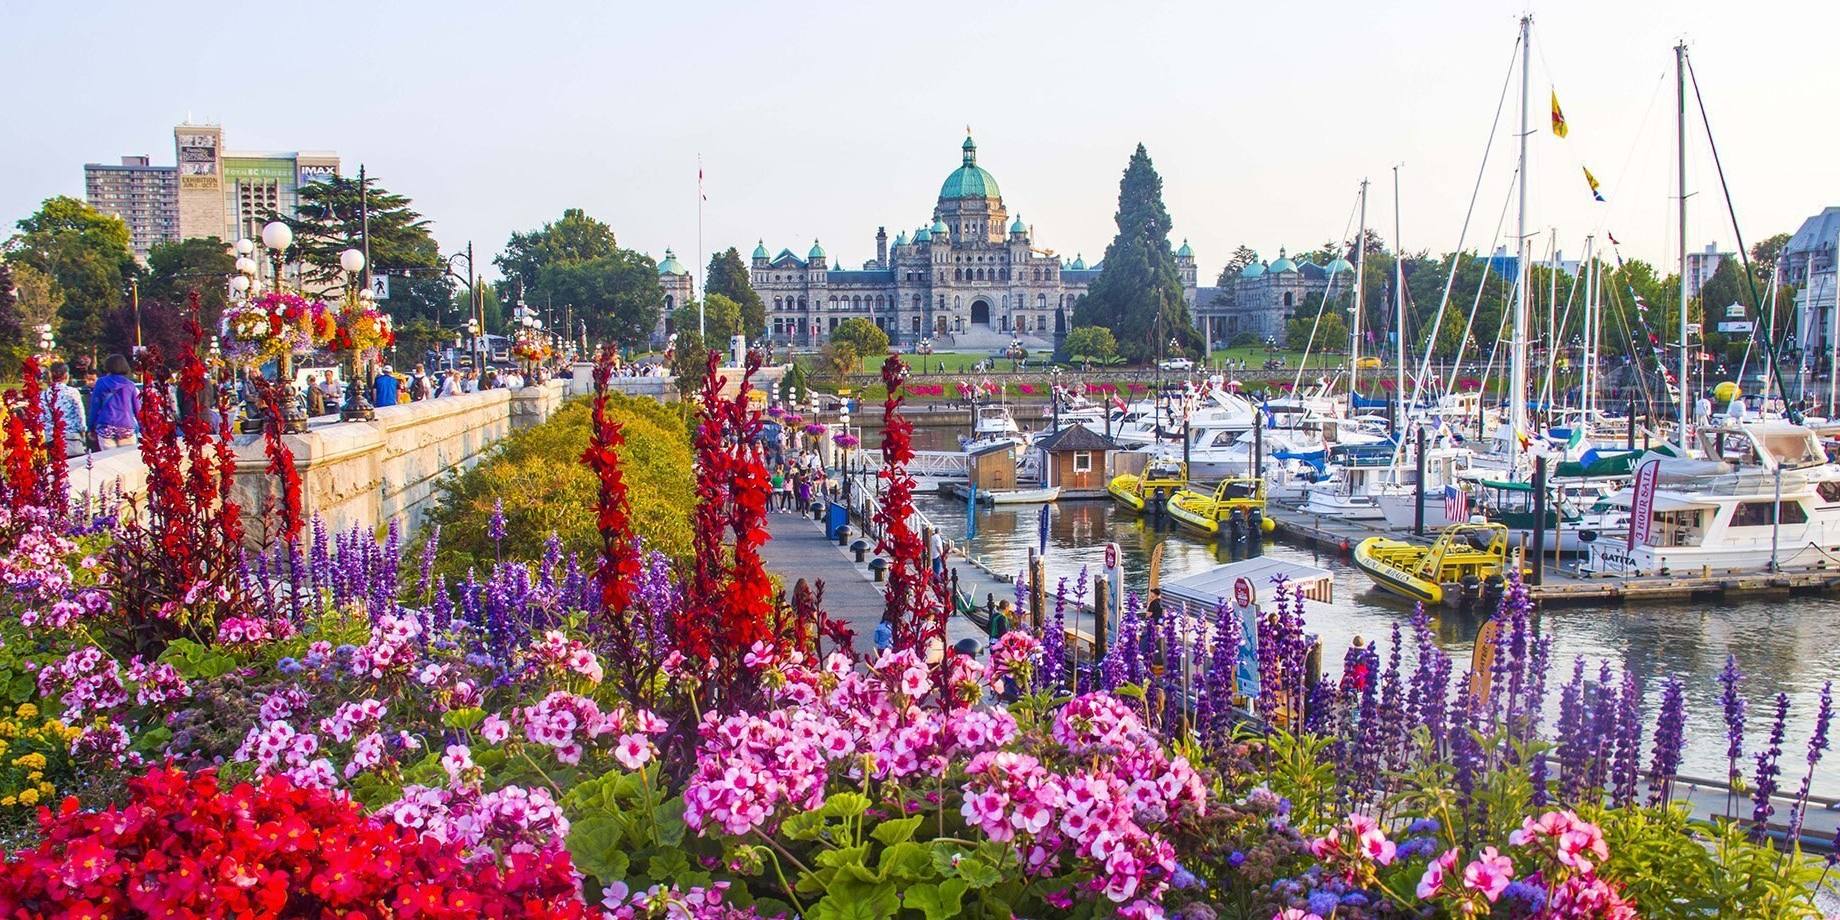 See The City of Gardens, Victoria, B.C. Rediscover Canada